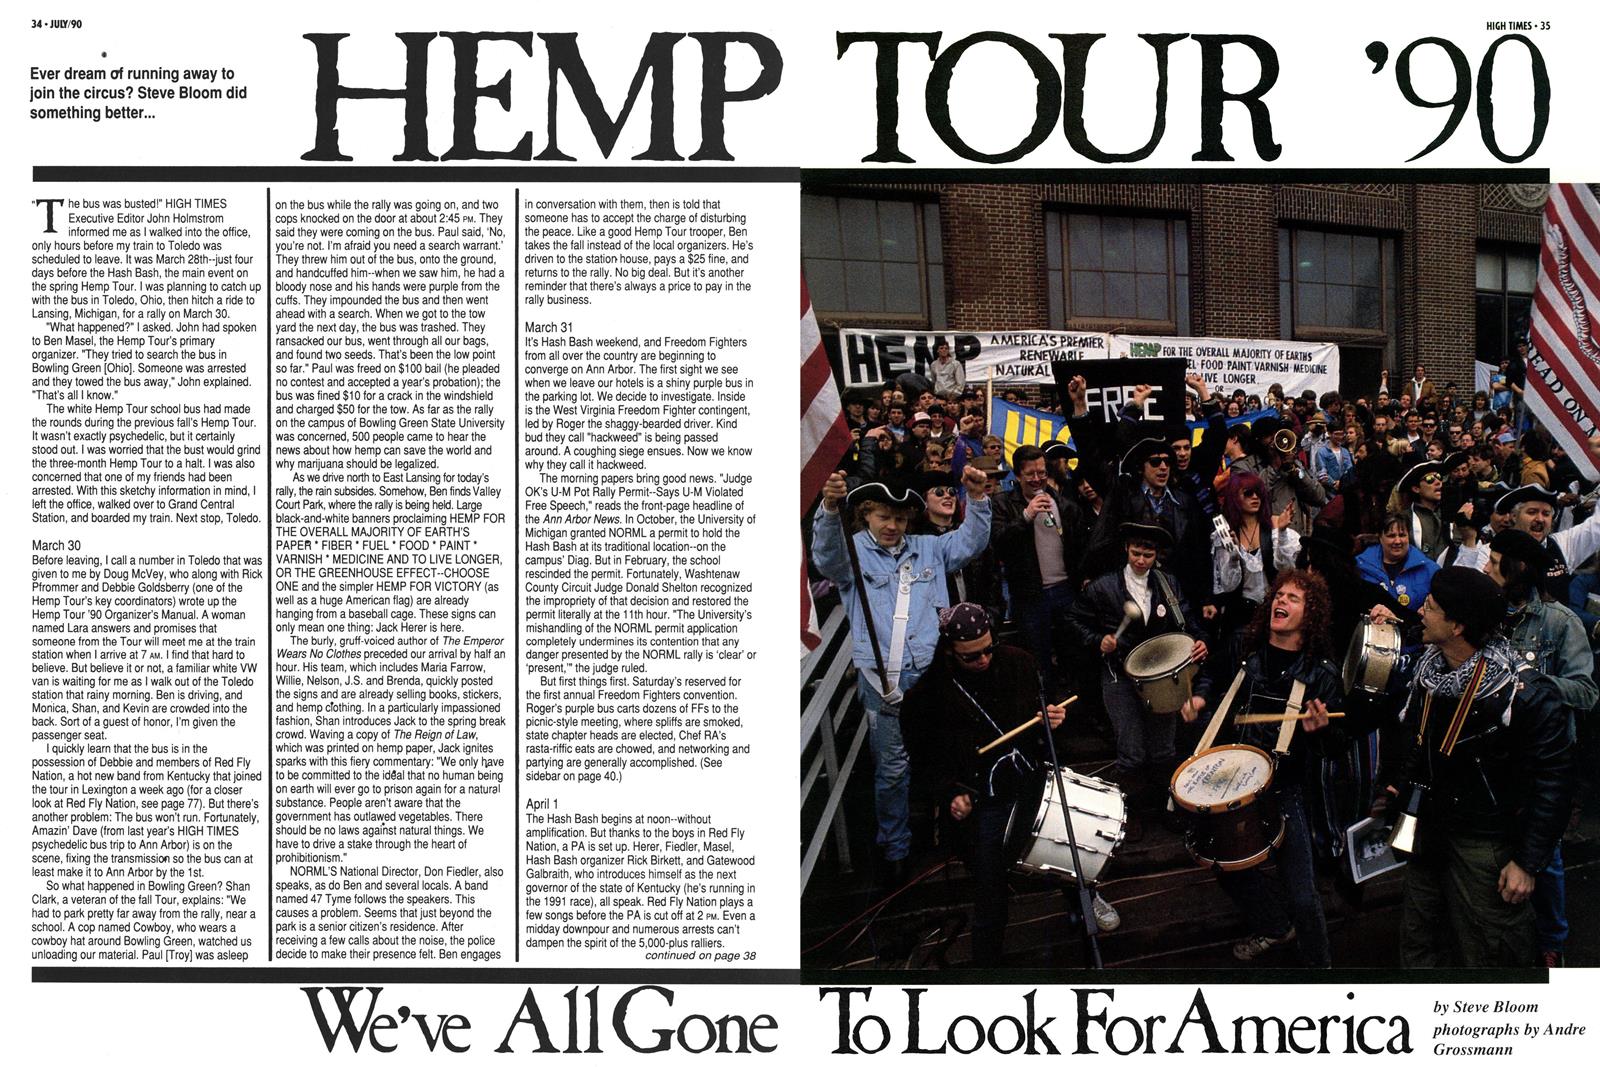 From the Archives: Hemp Tour ’90 (1990)